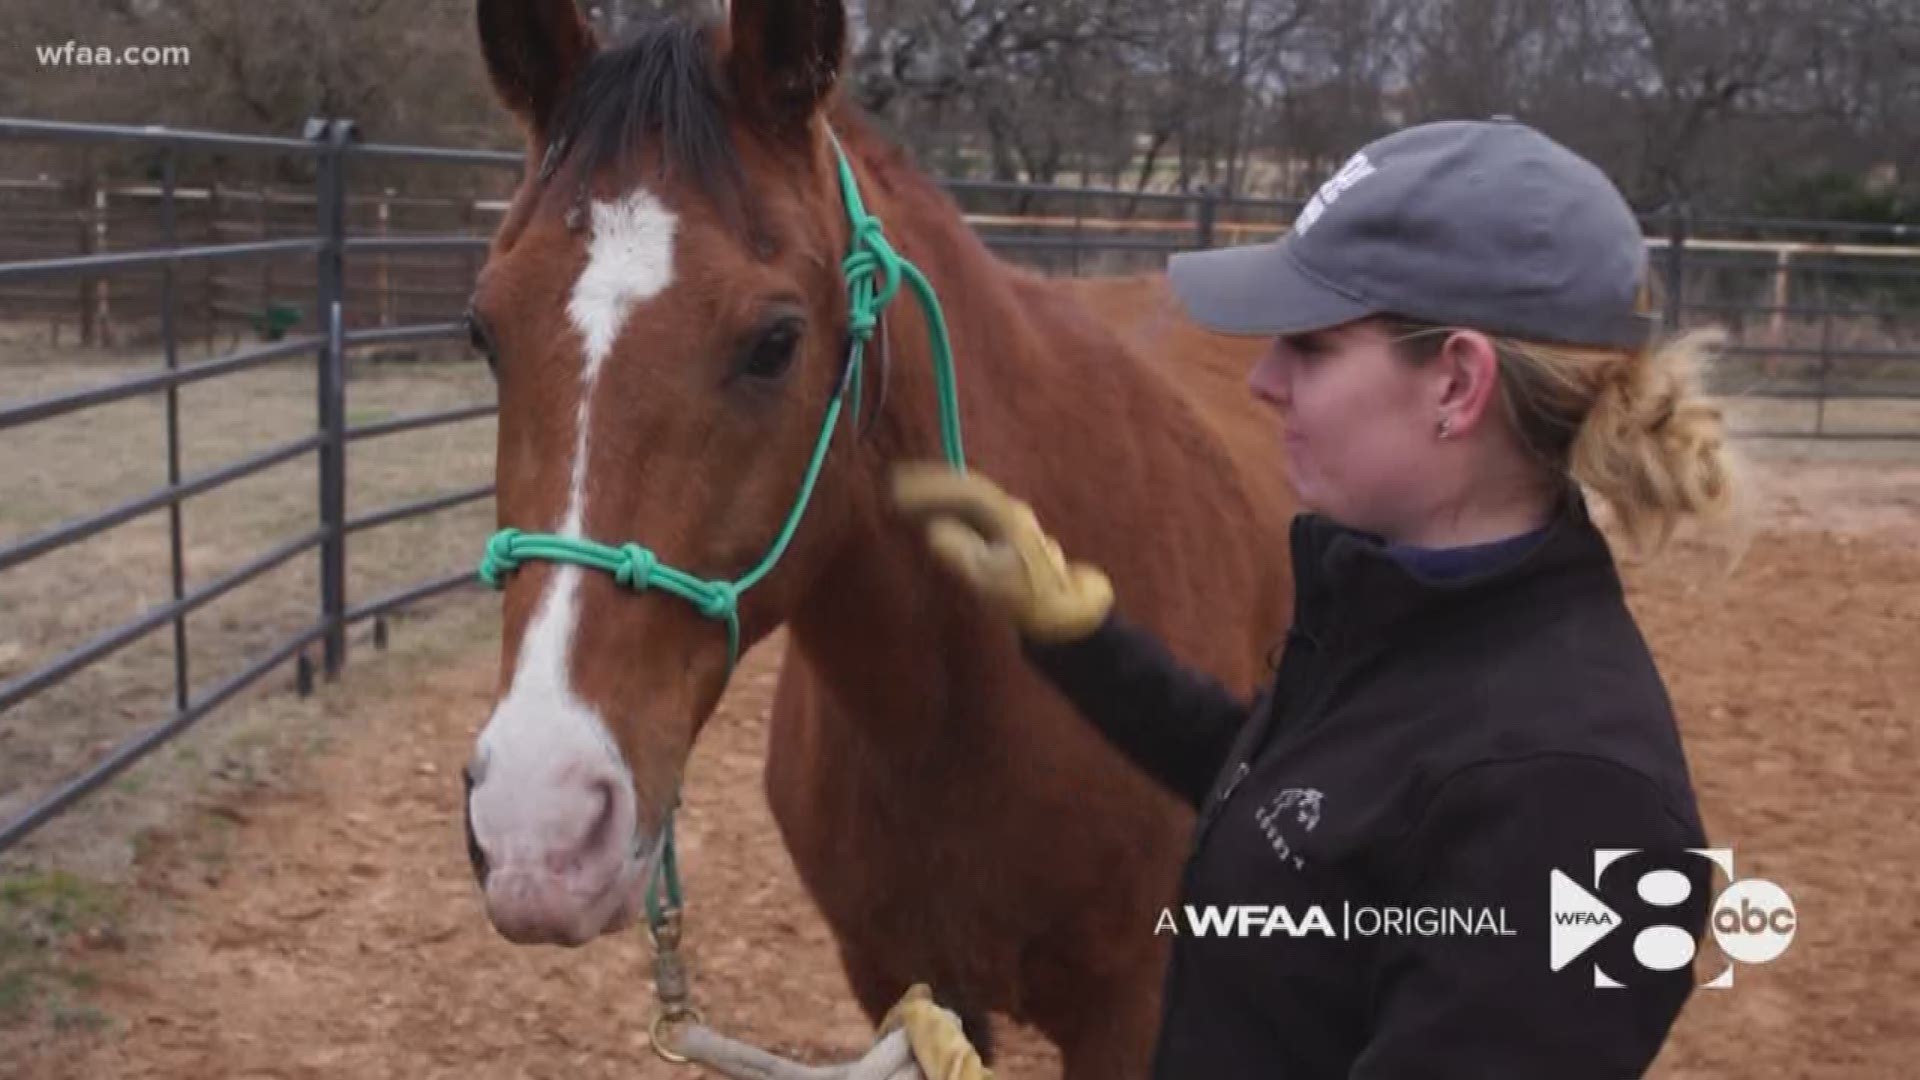 Did you know the SPCA of Texas helps horses?